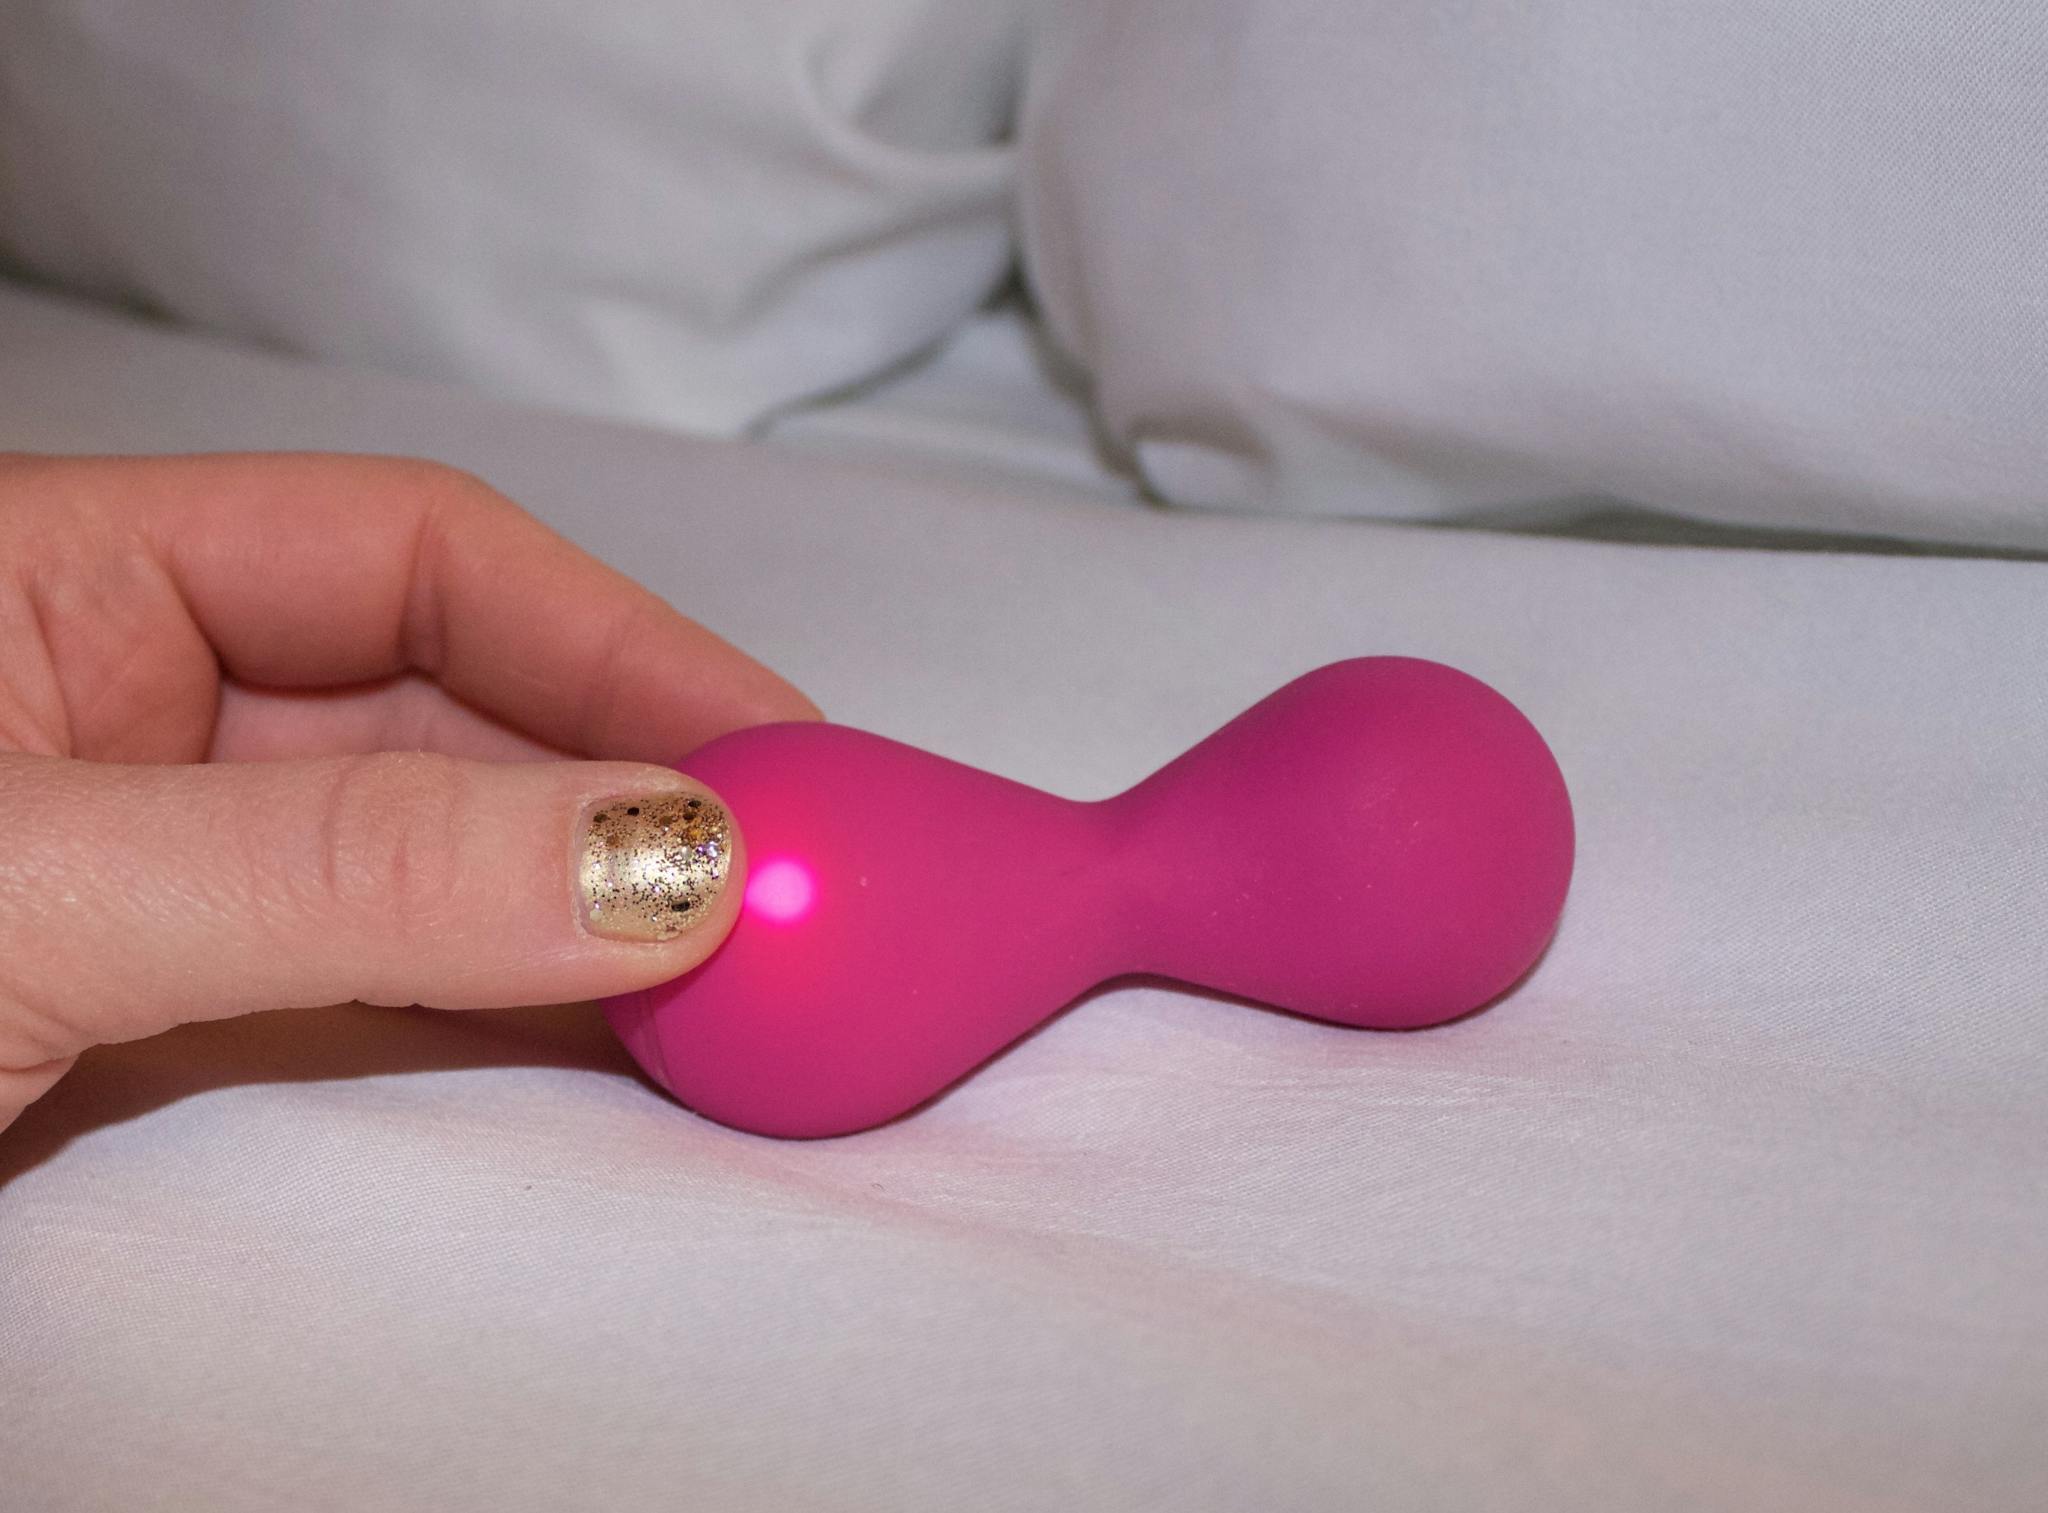 A New Kegel Vibrator Mixes Exercise With Excitement The Daily Dot